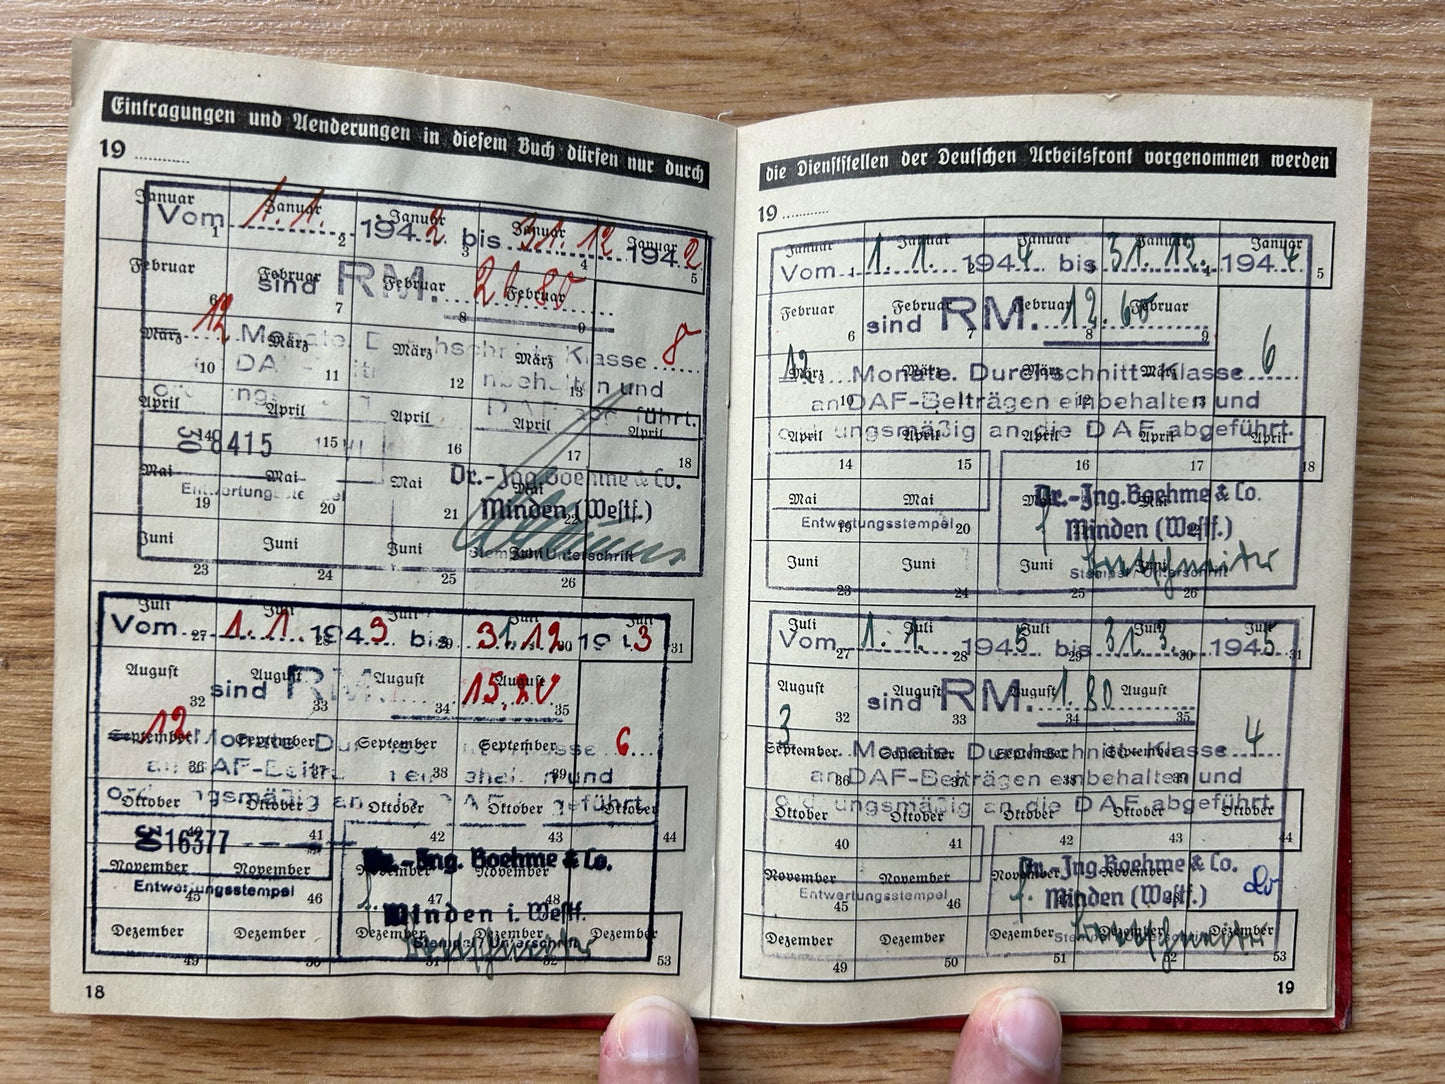 DAF member’s grouping - ID and song book